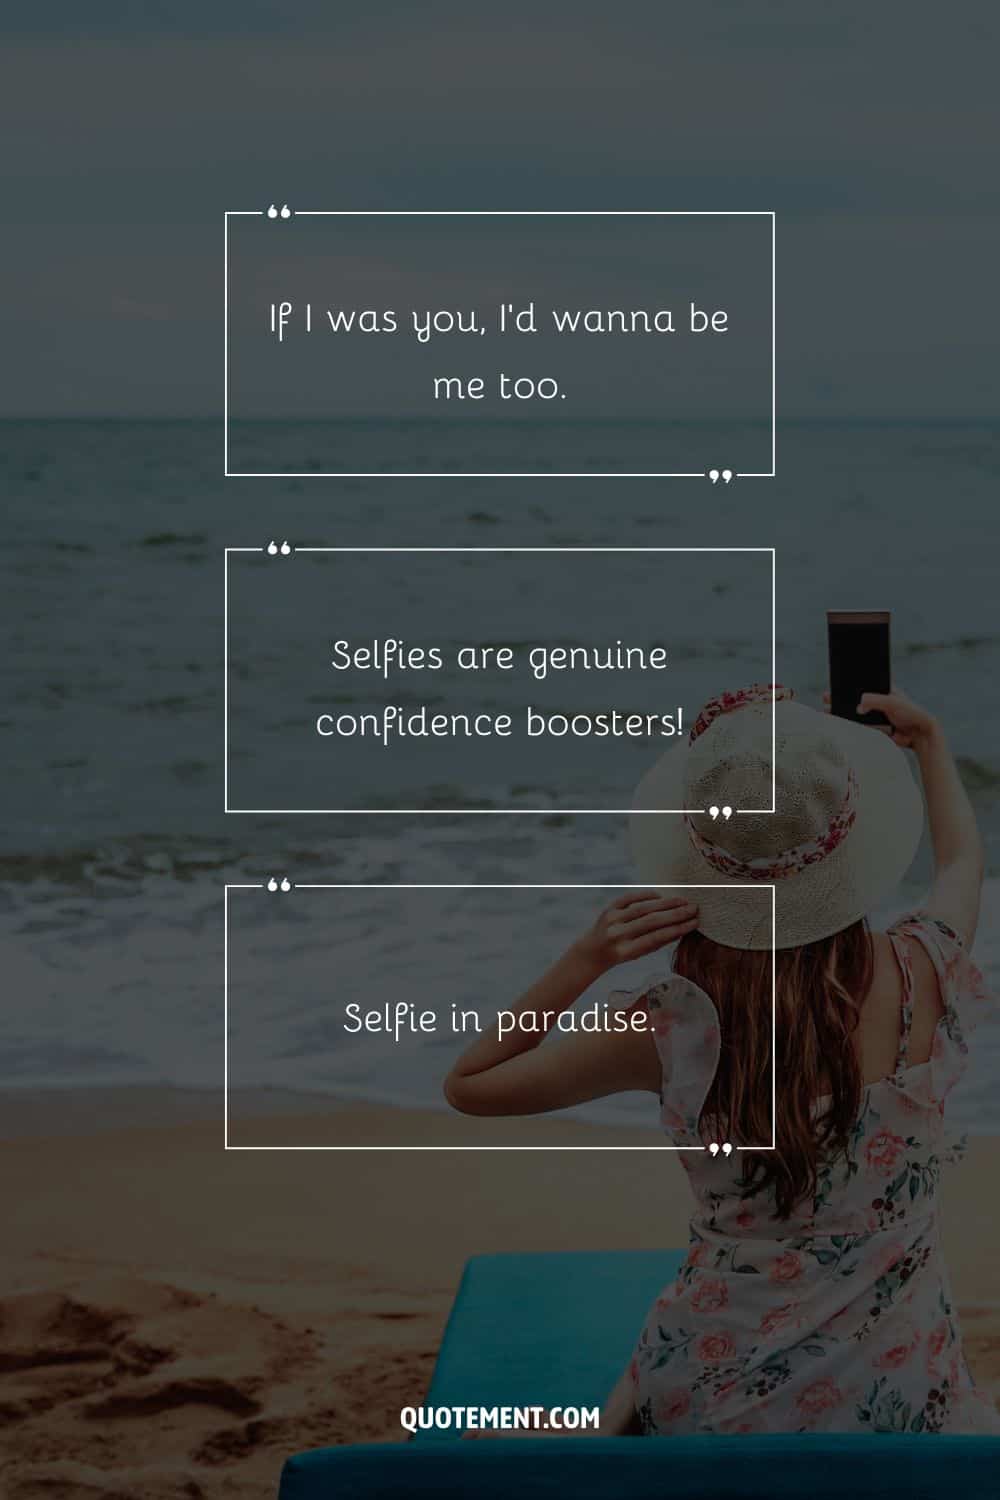 3 short Ig captions for selfies and a woman taking a selfie on a beach in the background
